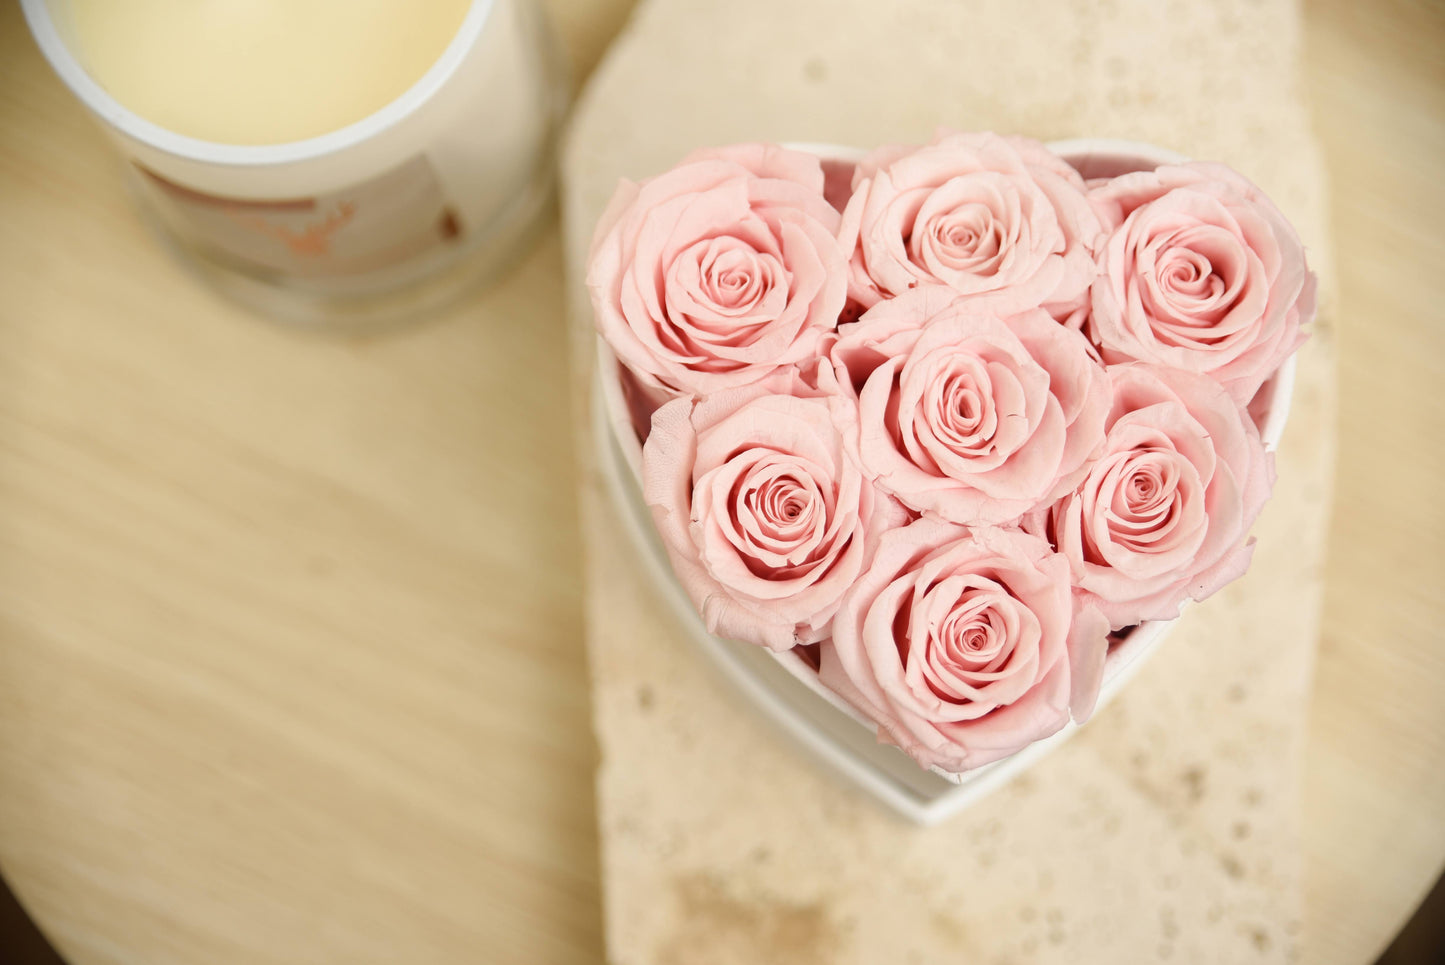 Small pink everlasting roses in heart shape box